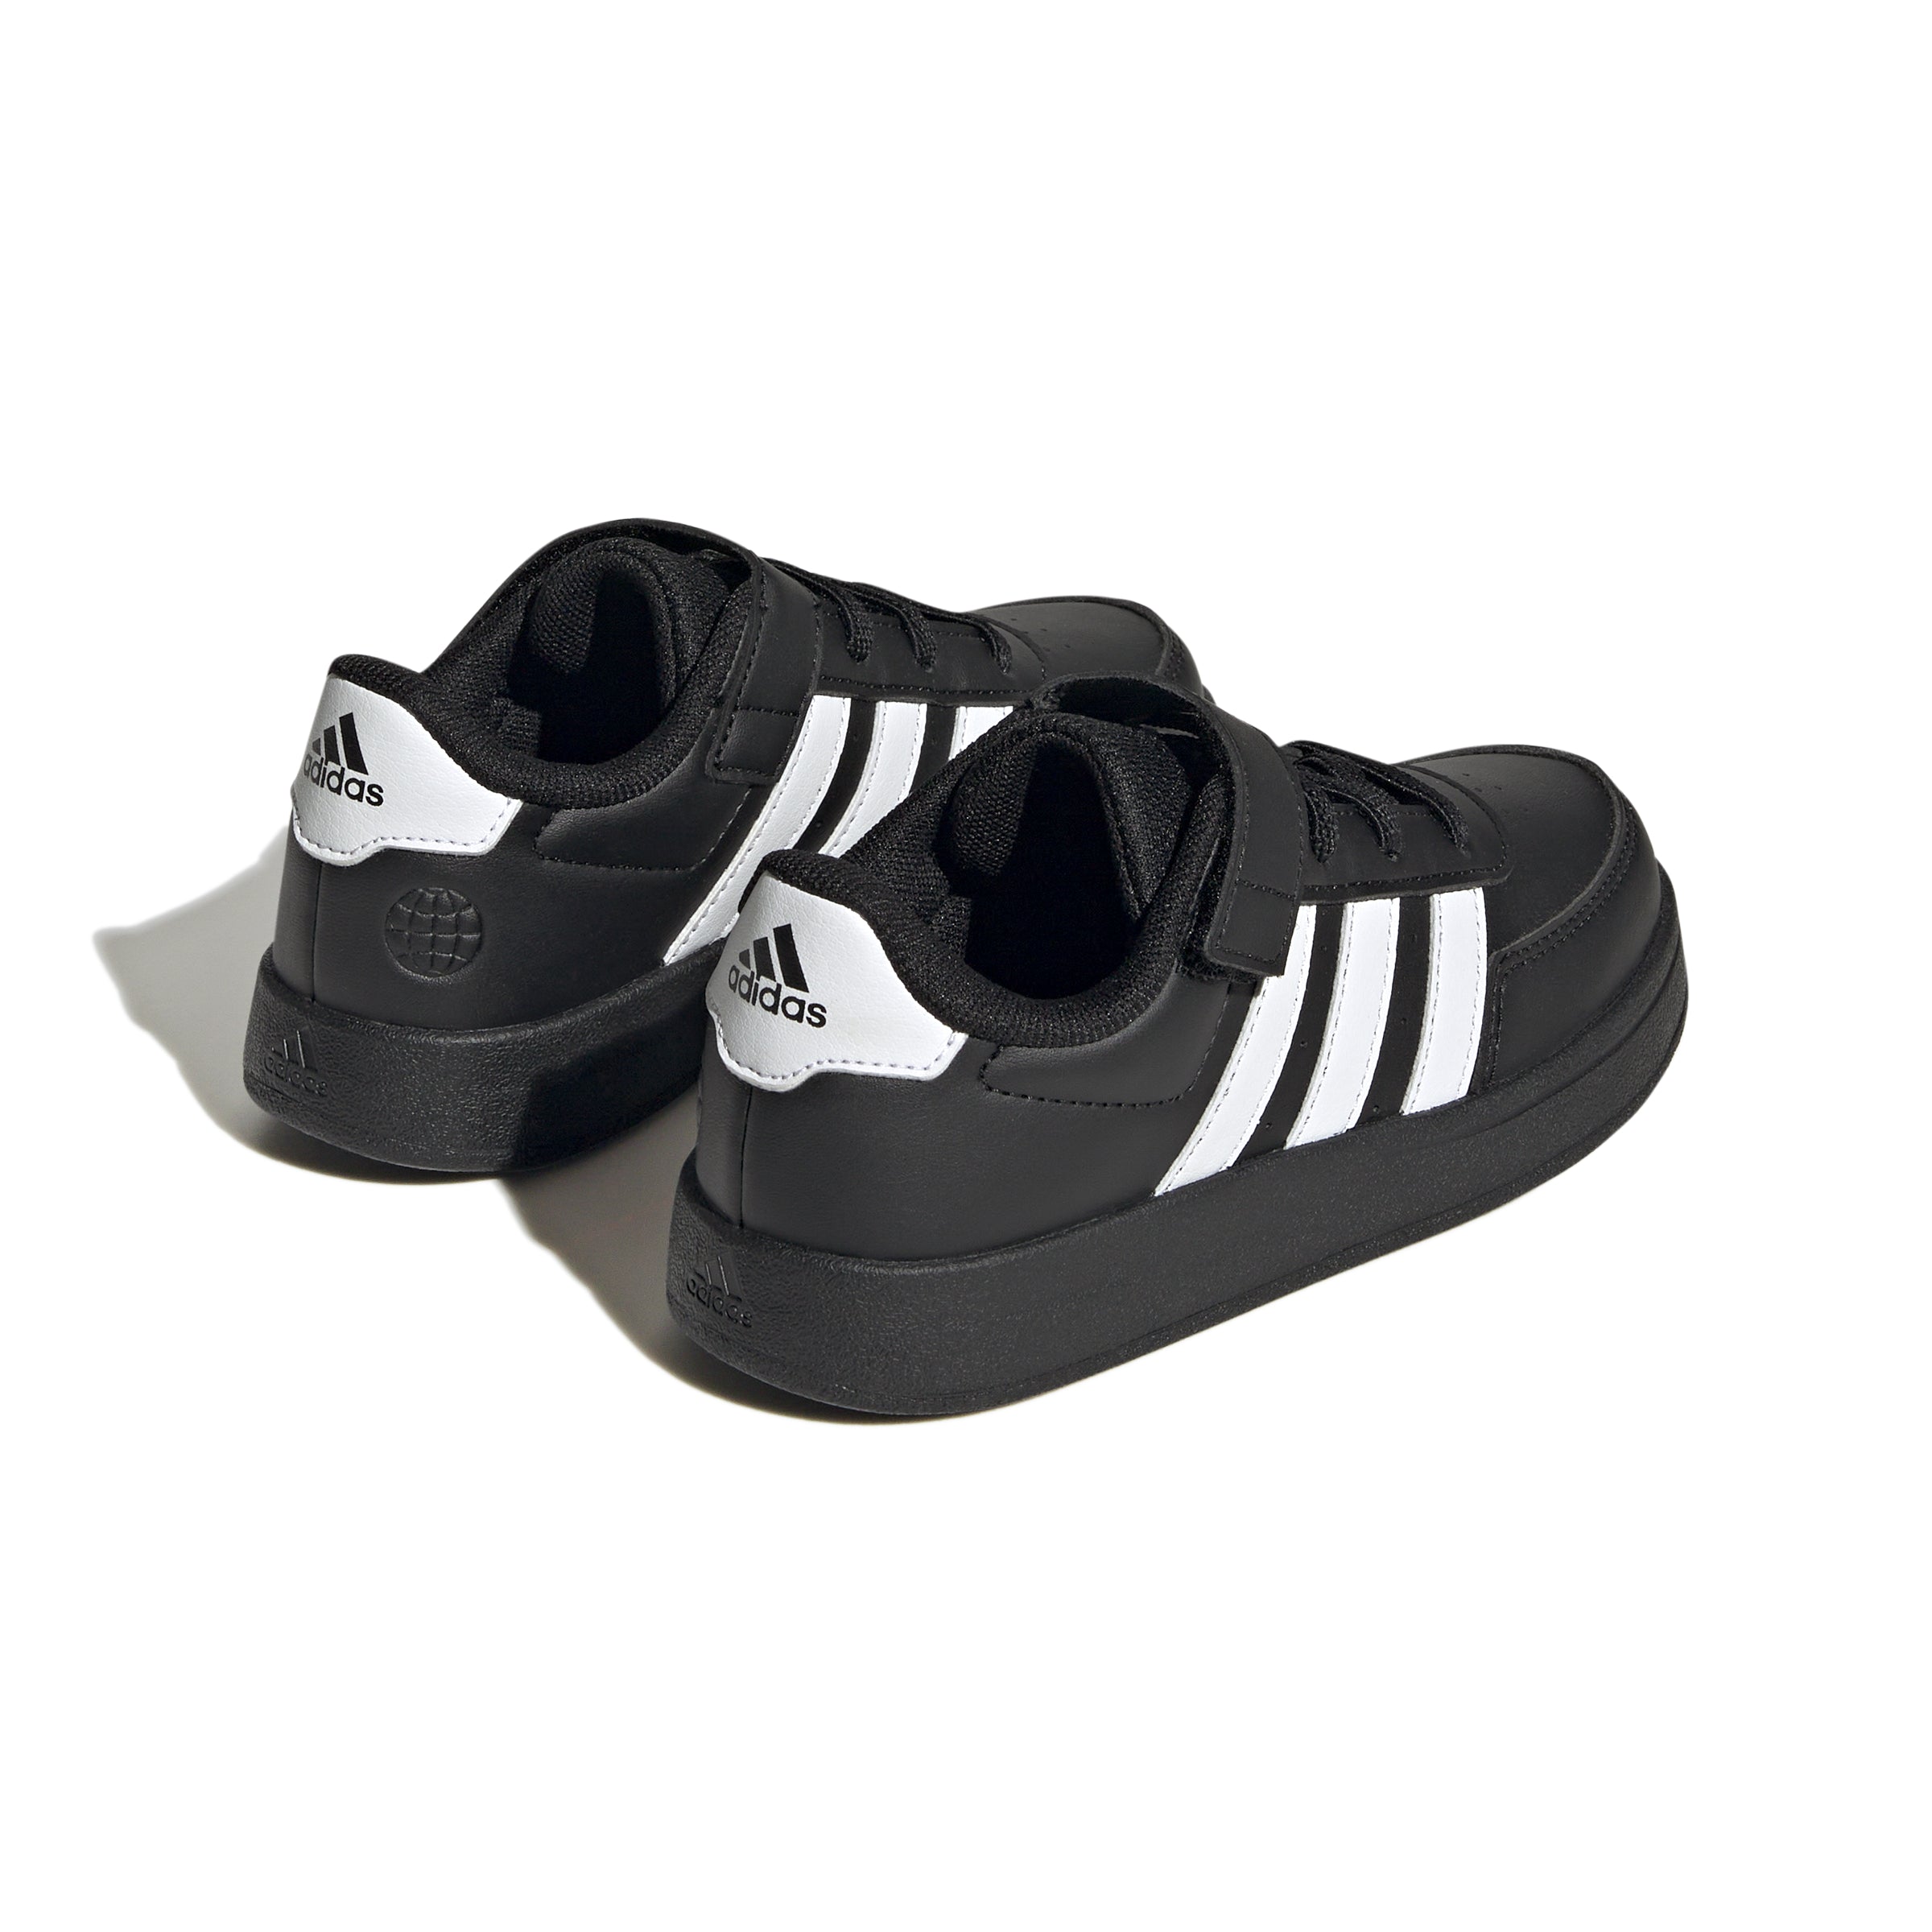 Adidas Breaknet 2.0 Lifestyle Court Shoes